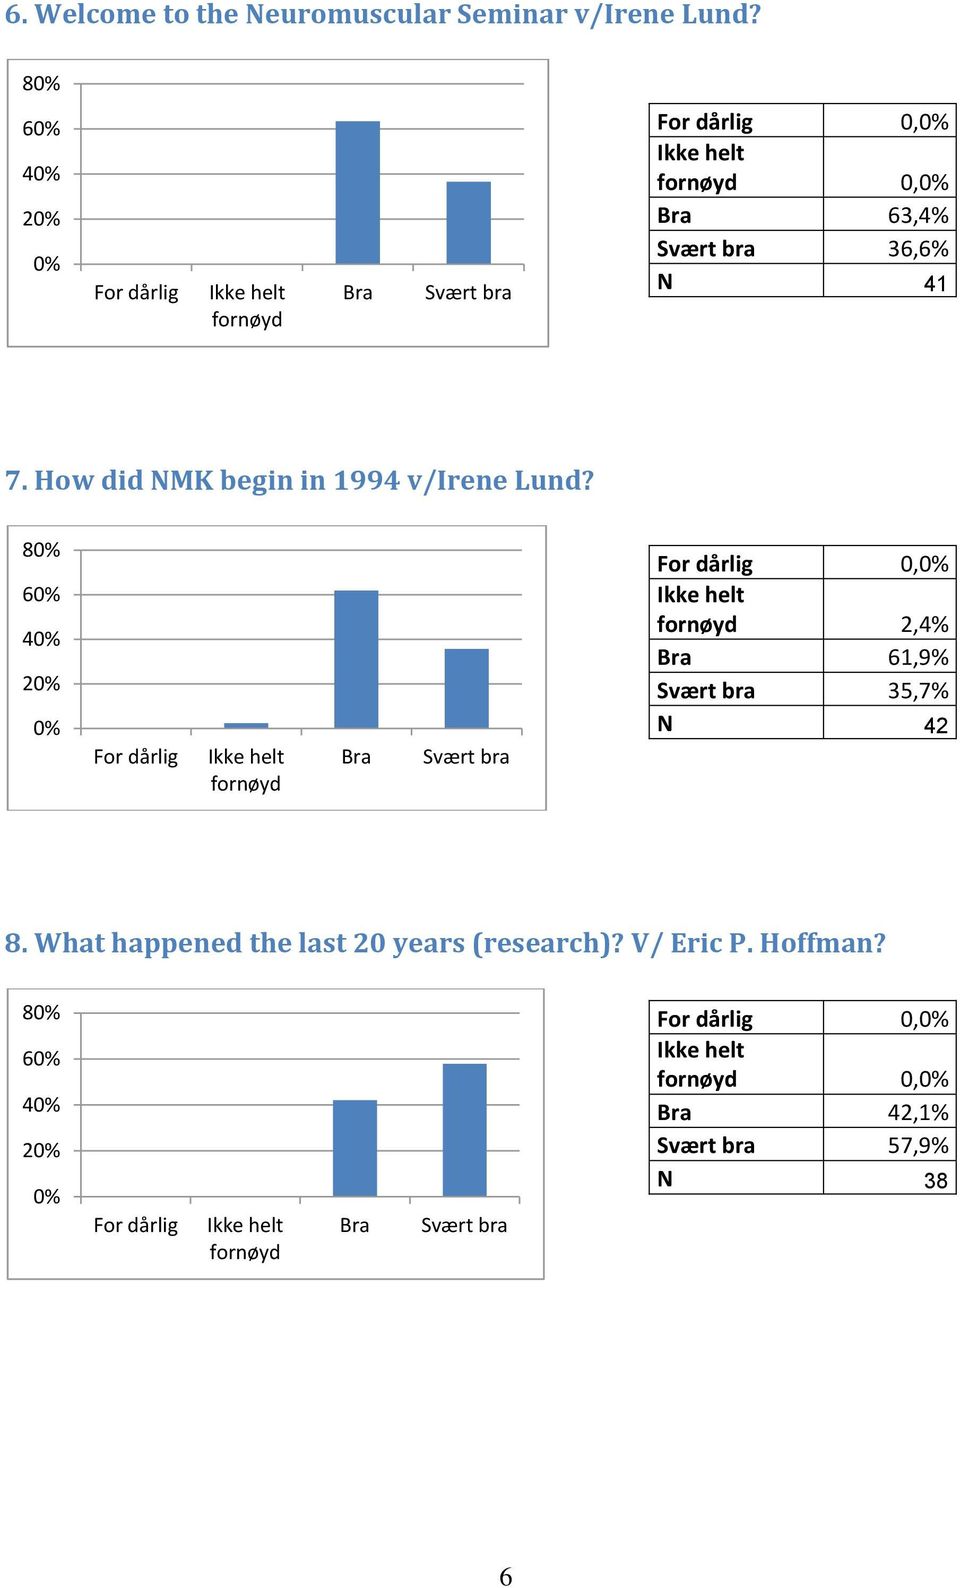 How did NMK begin in 1994 v/irene Lund?